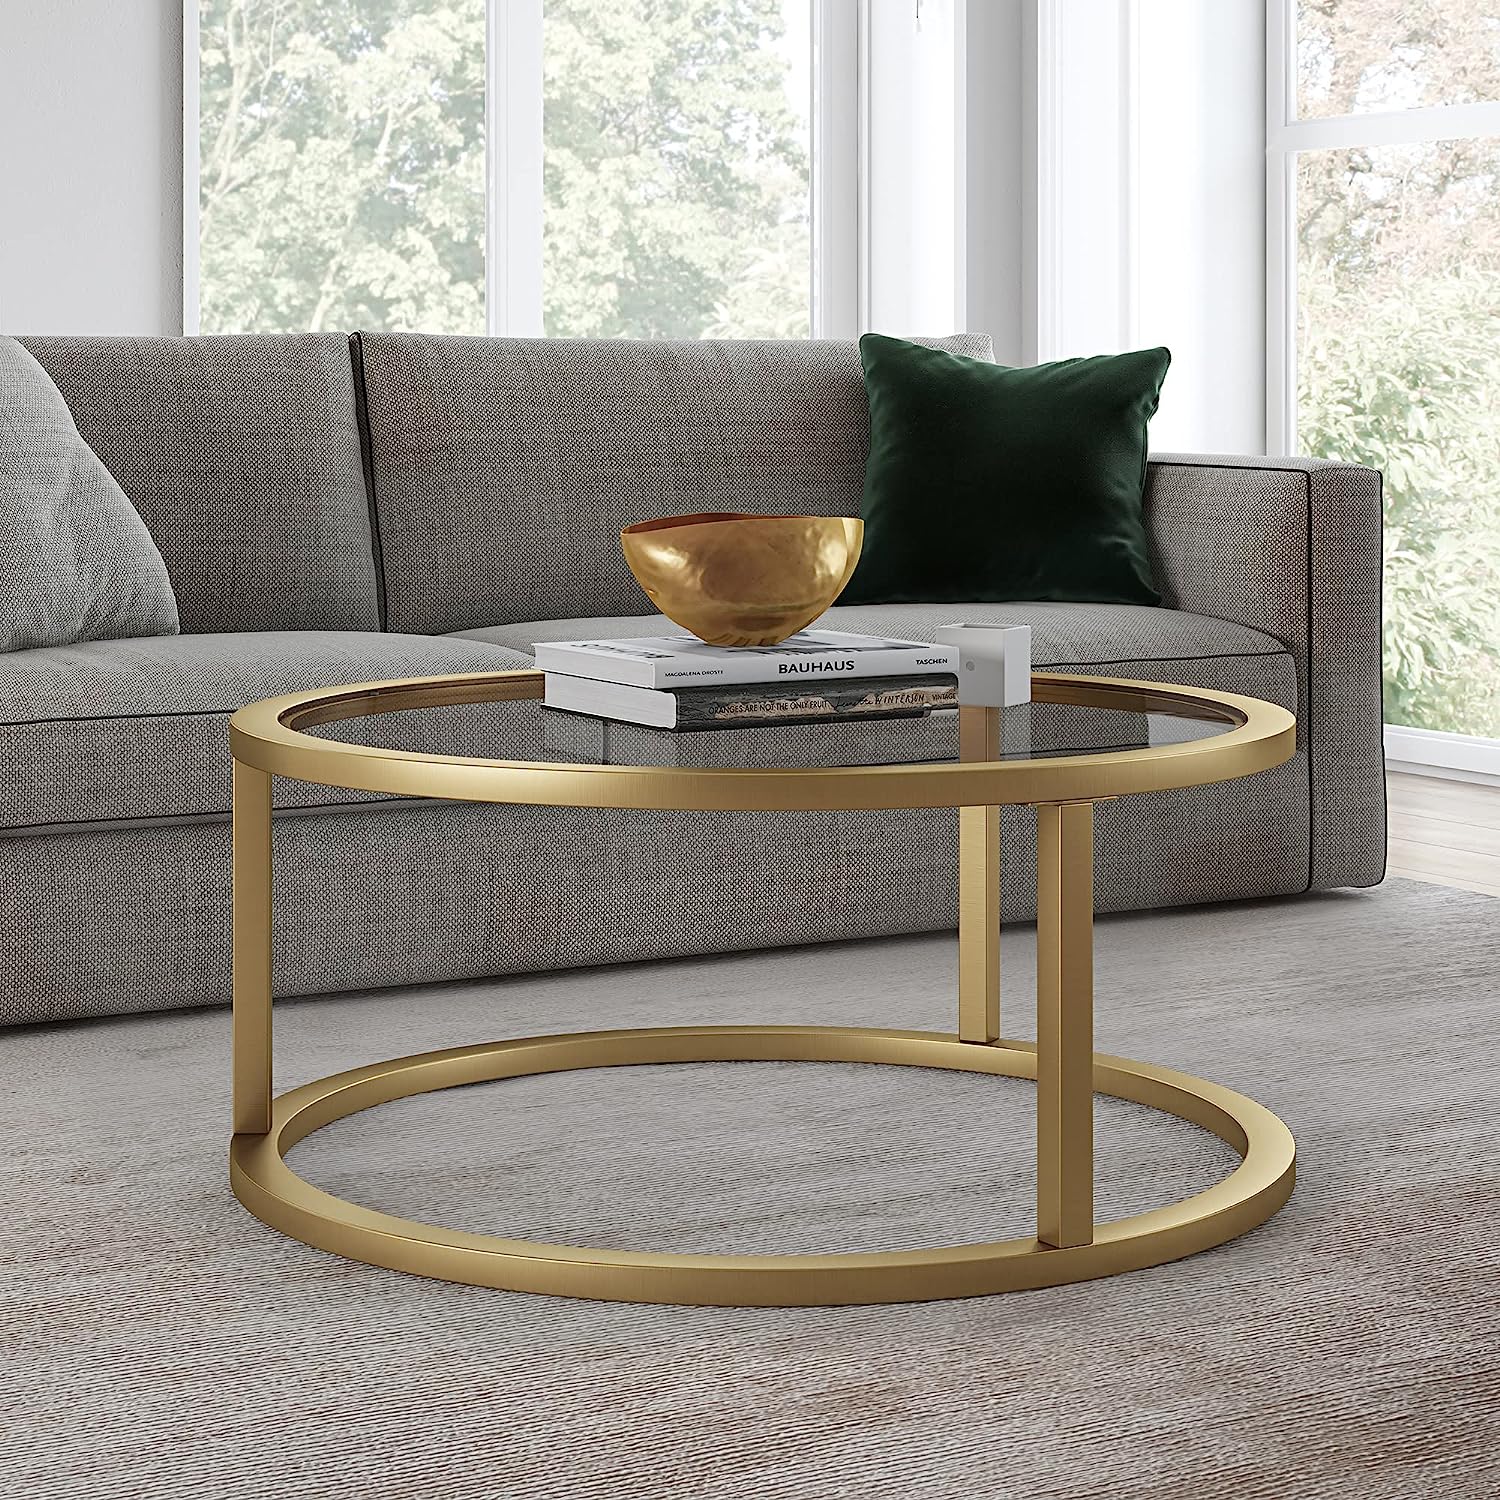 round glass and gold living room table with transparent glas tabletop and brushed golden base contemporary glam furniture cocktail table for living room minimalistic base modern